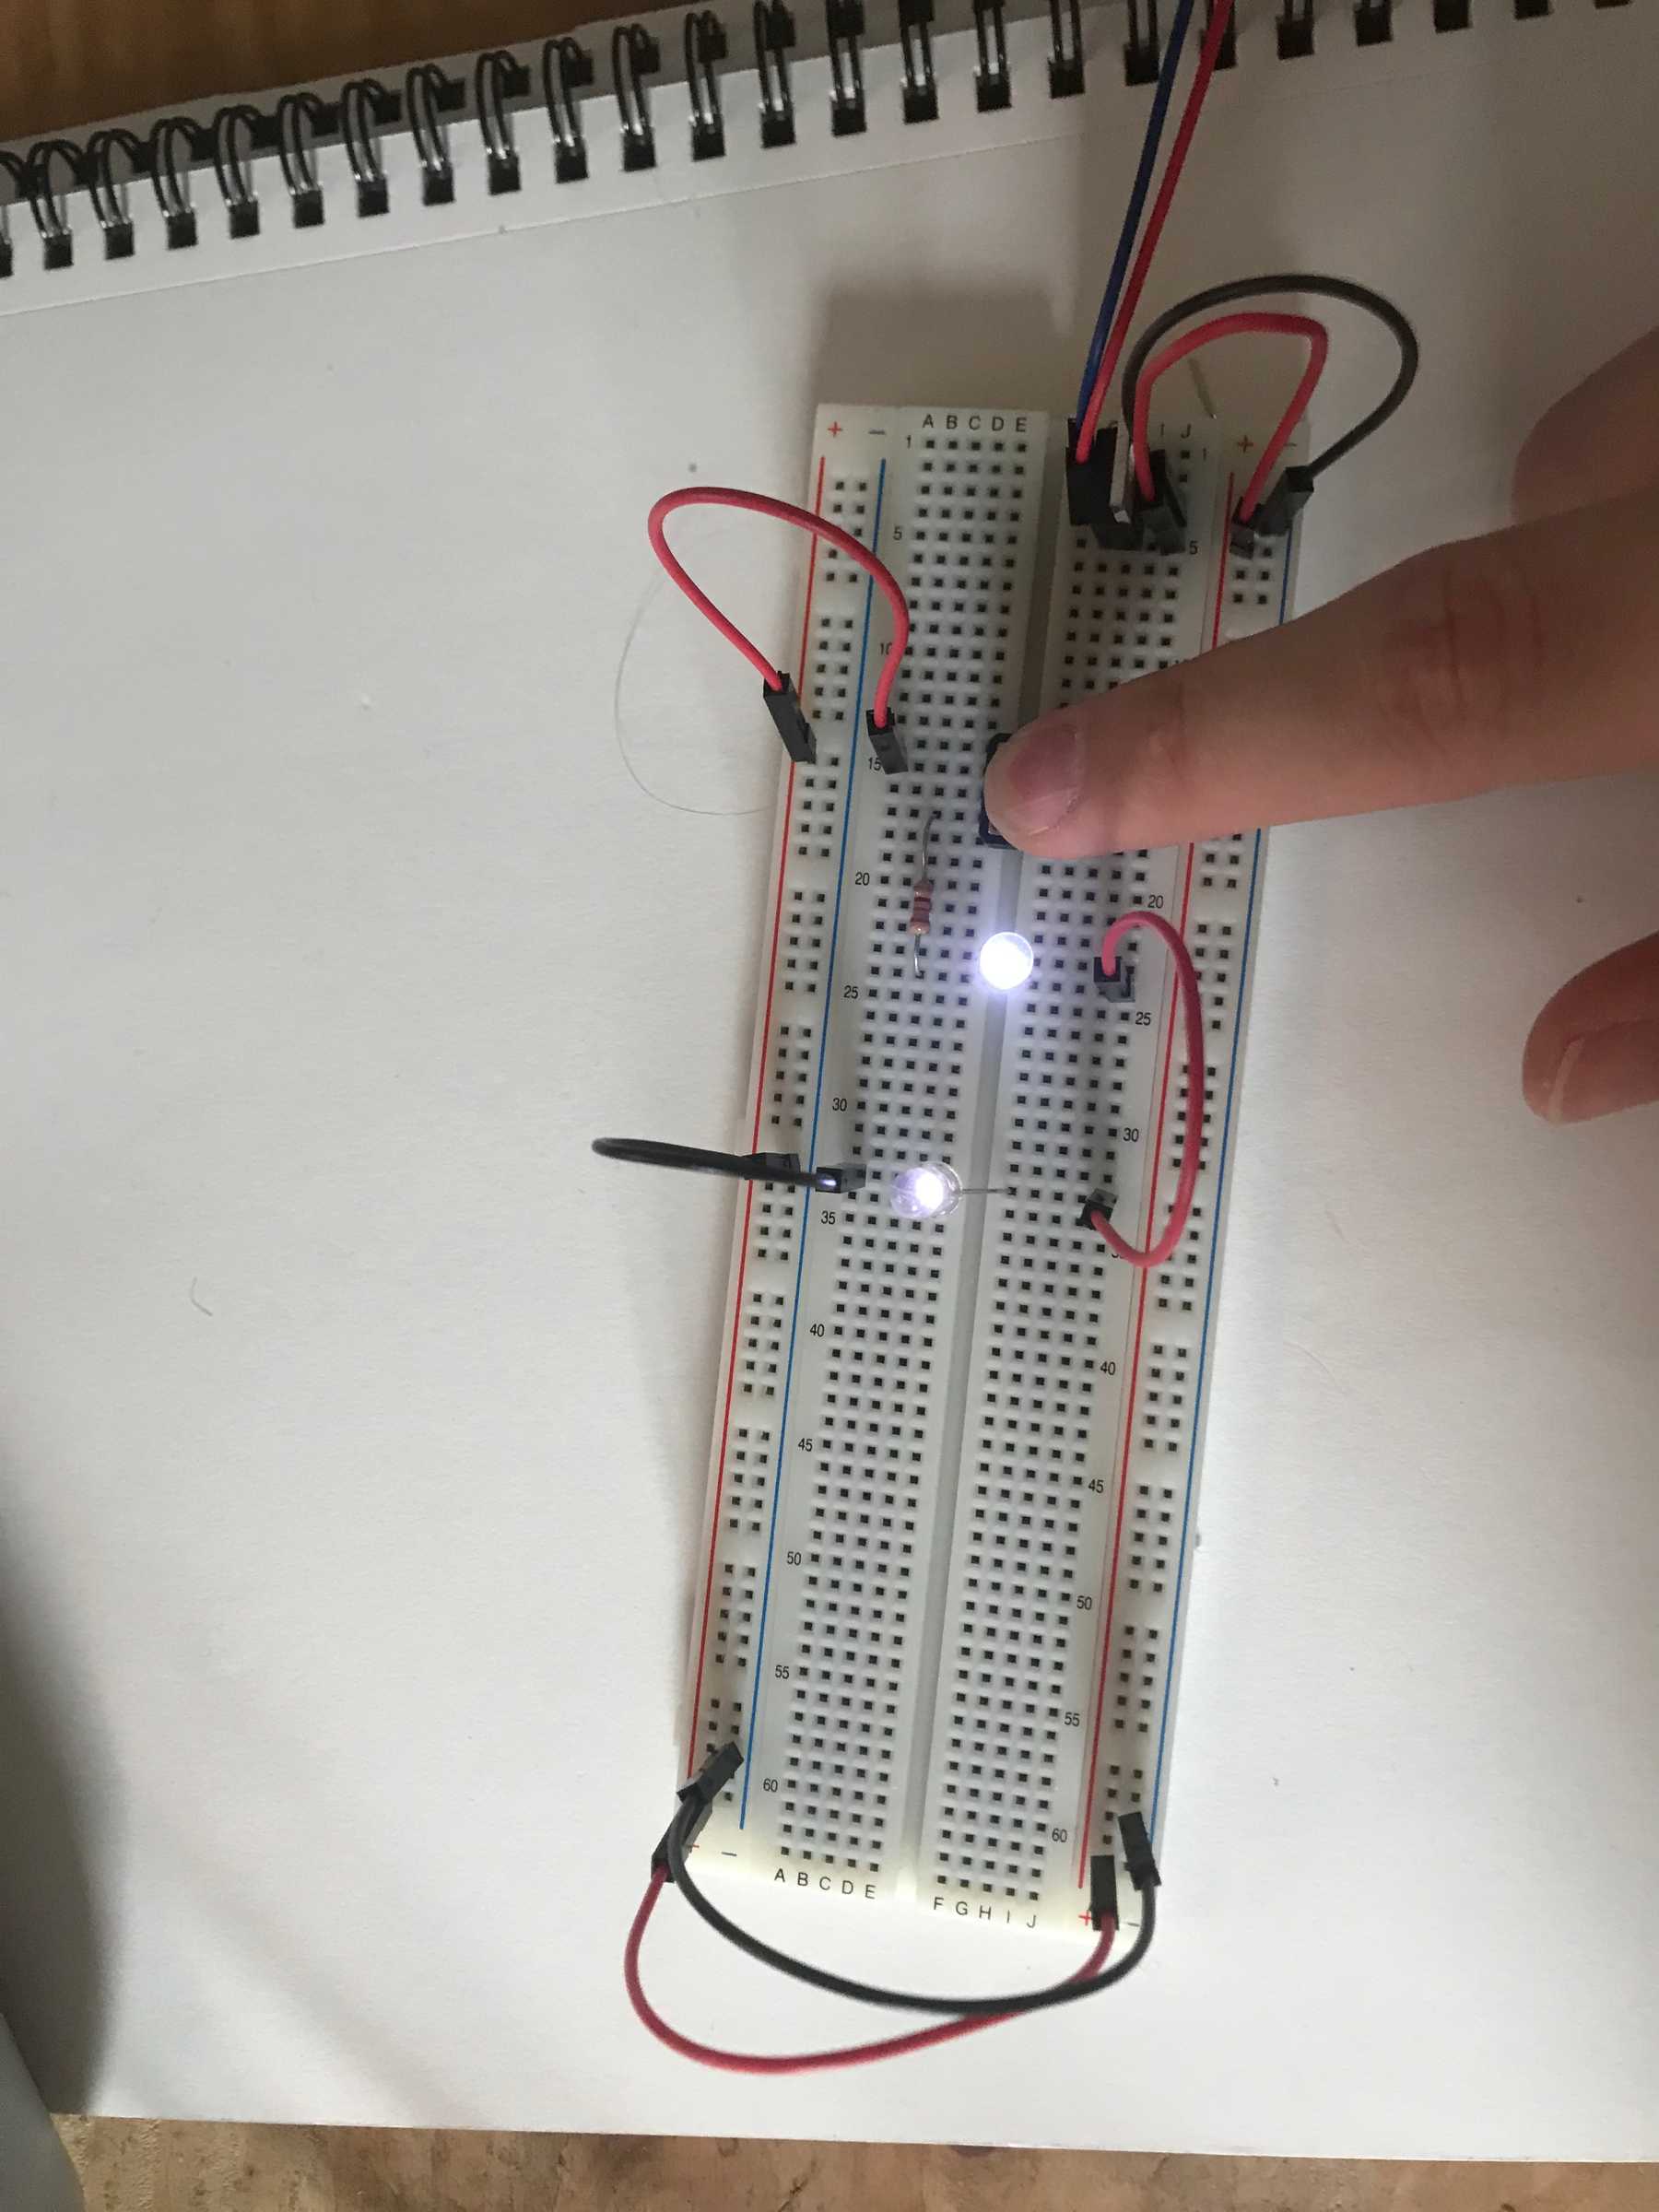 Pressing the button causes both LEDs to illuminate faintly